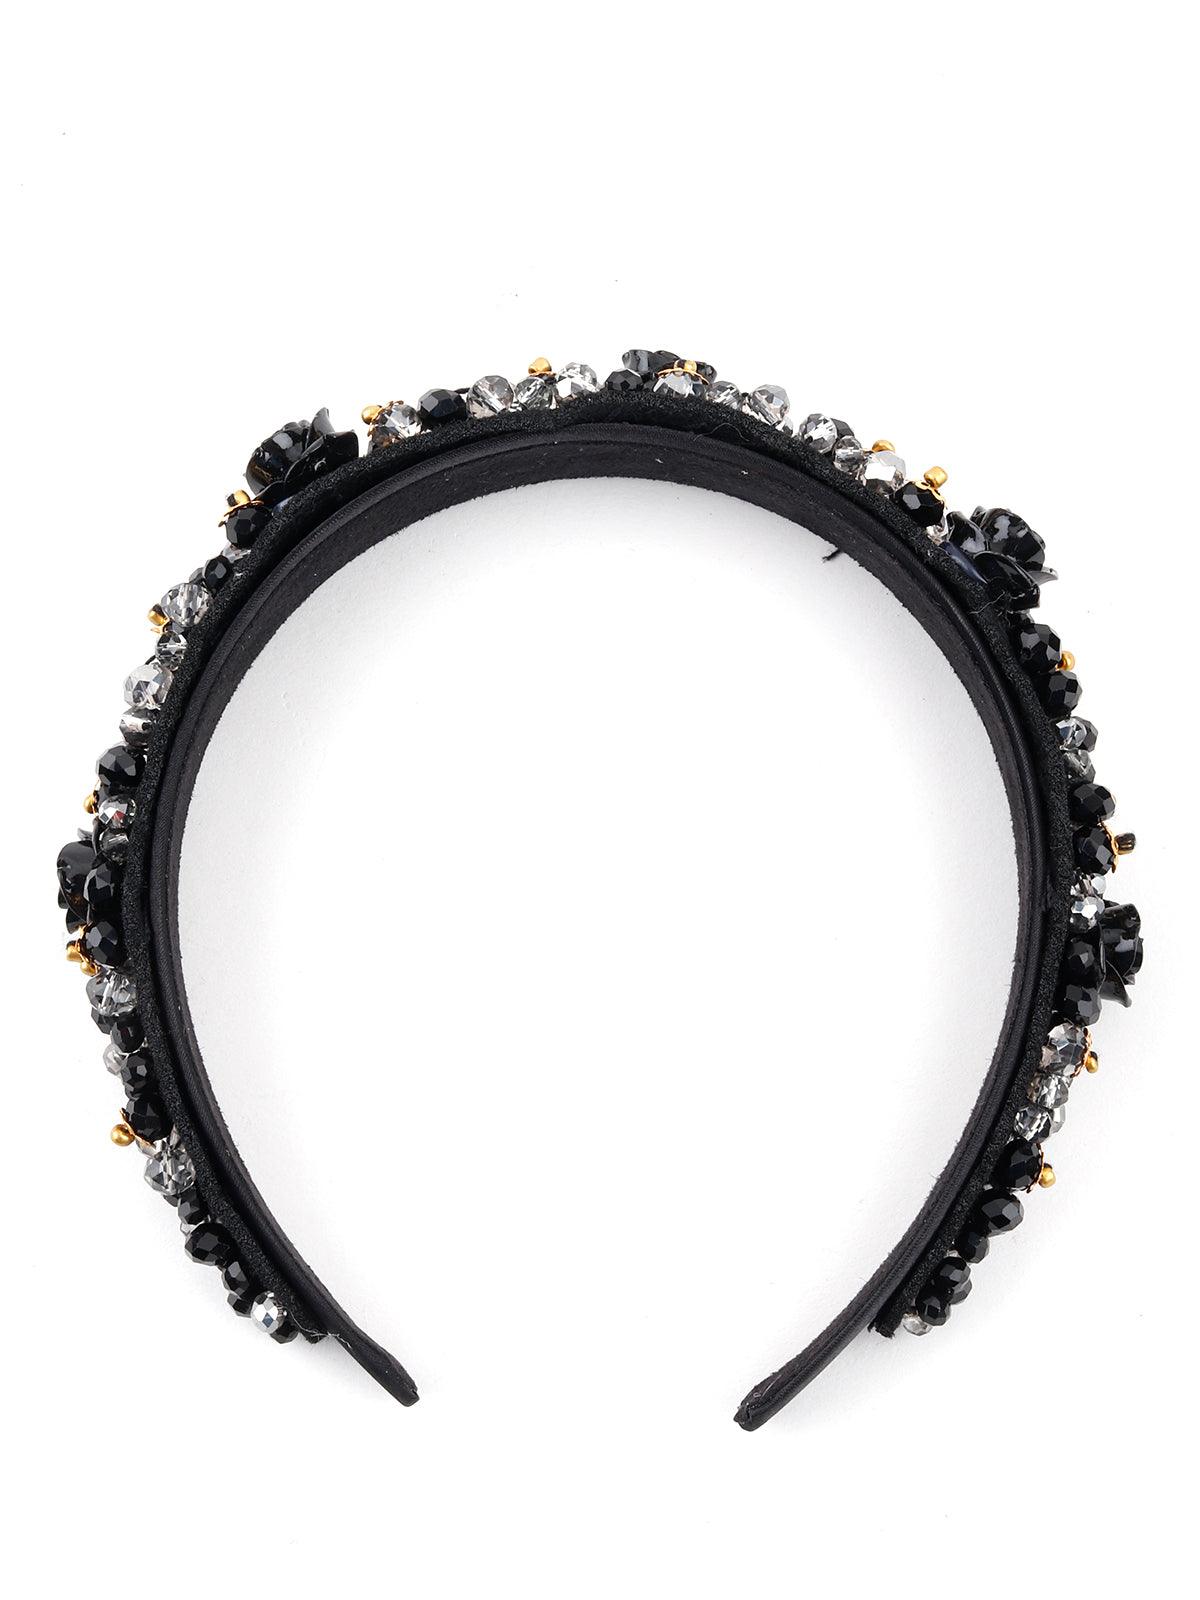 Ash Grey and black beads Hair Band - Odette